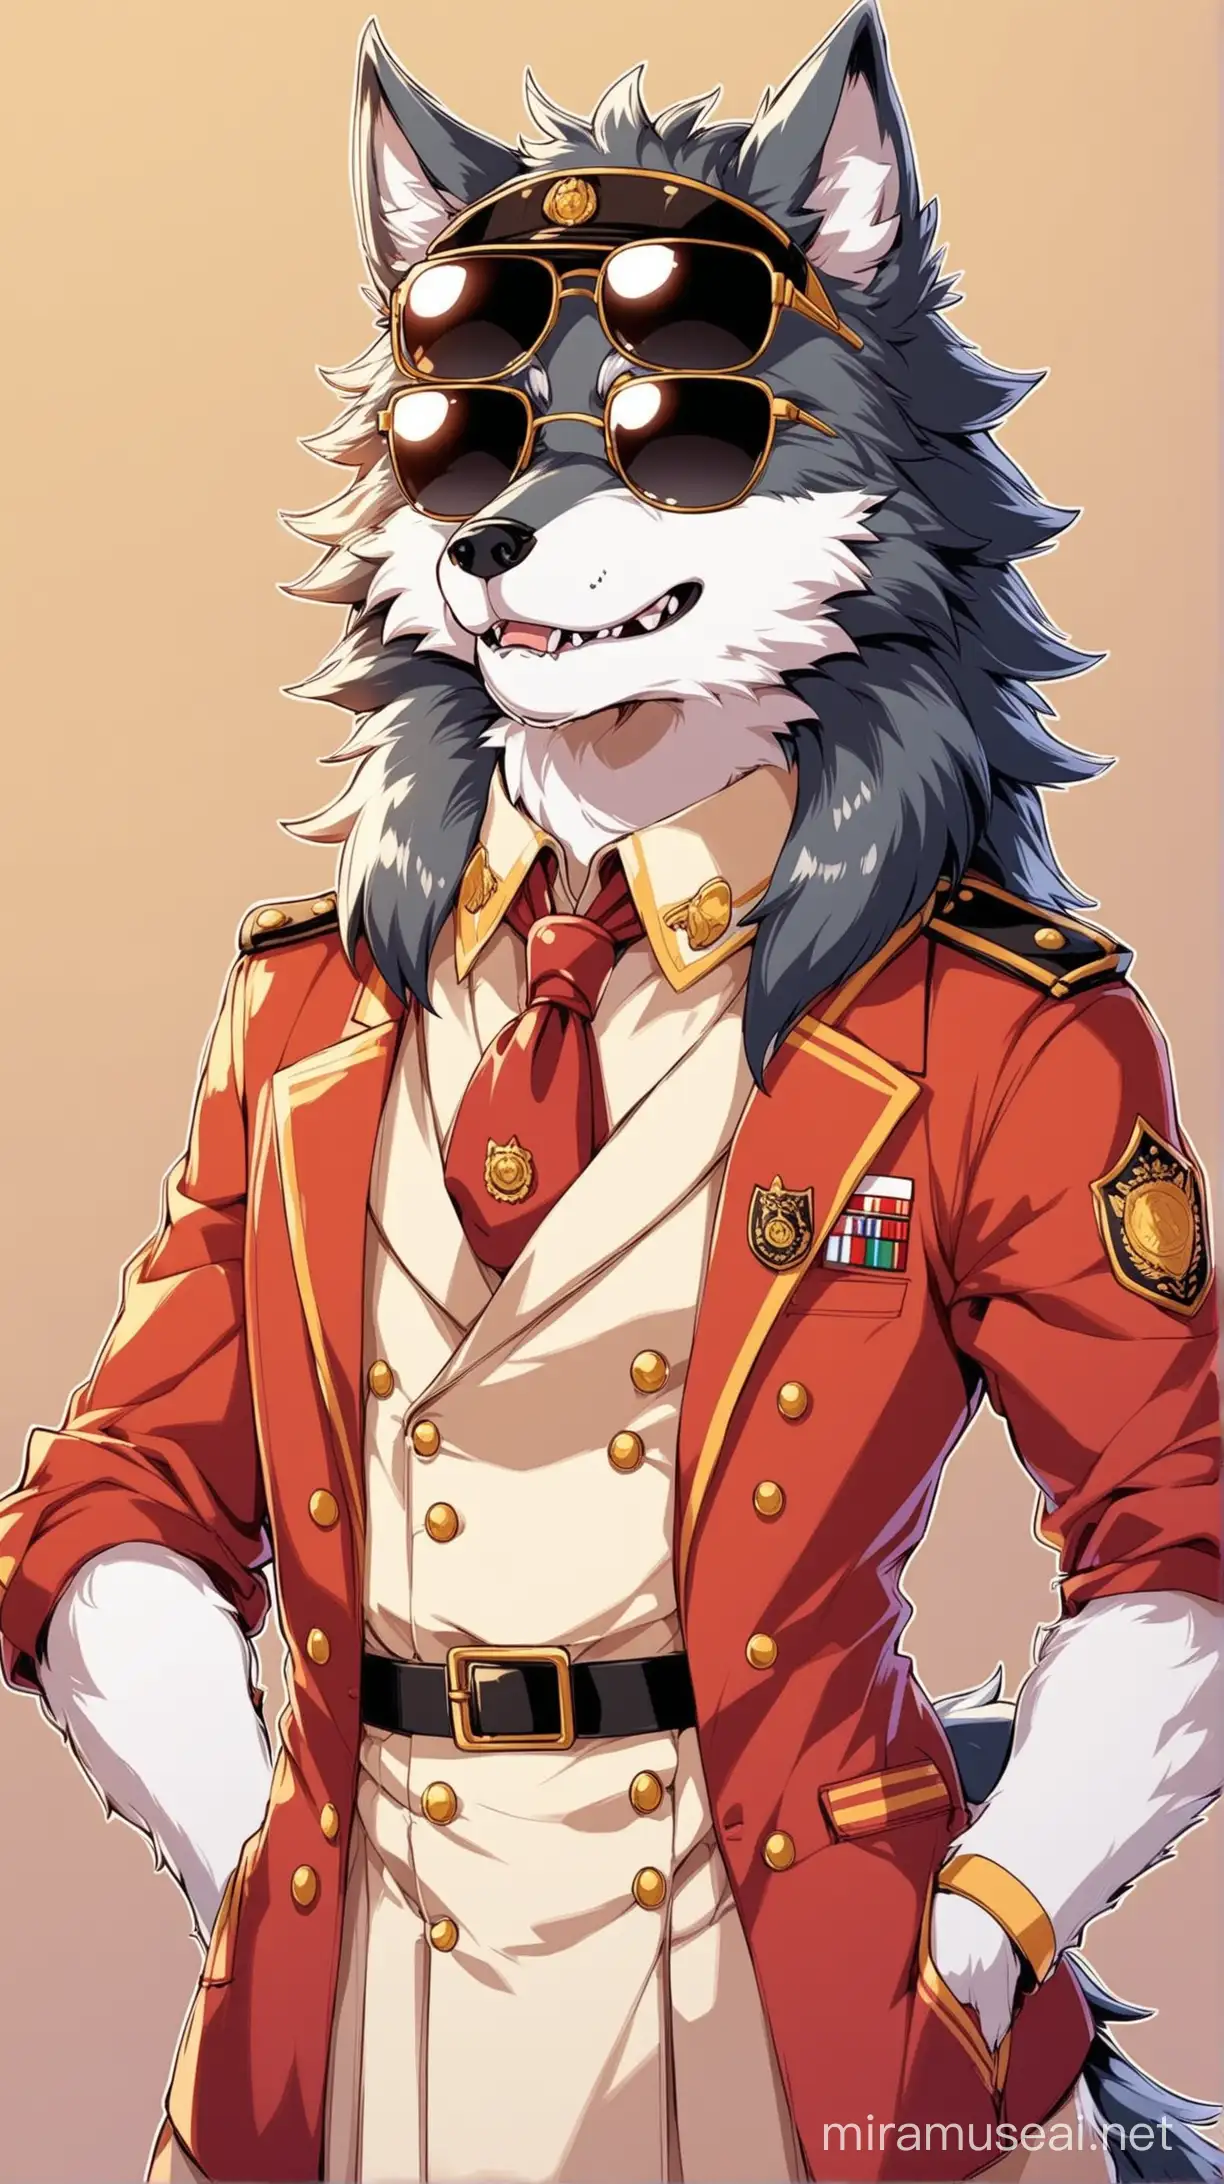 a cute anime anthro wolf wearing sunglasses and old uniform happy